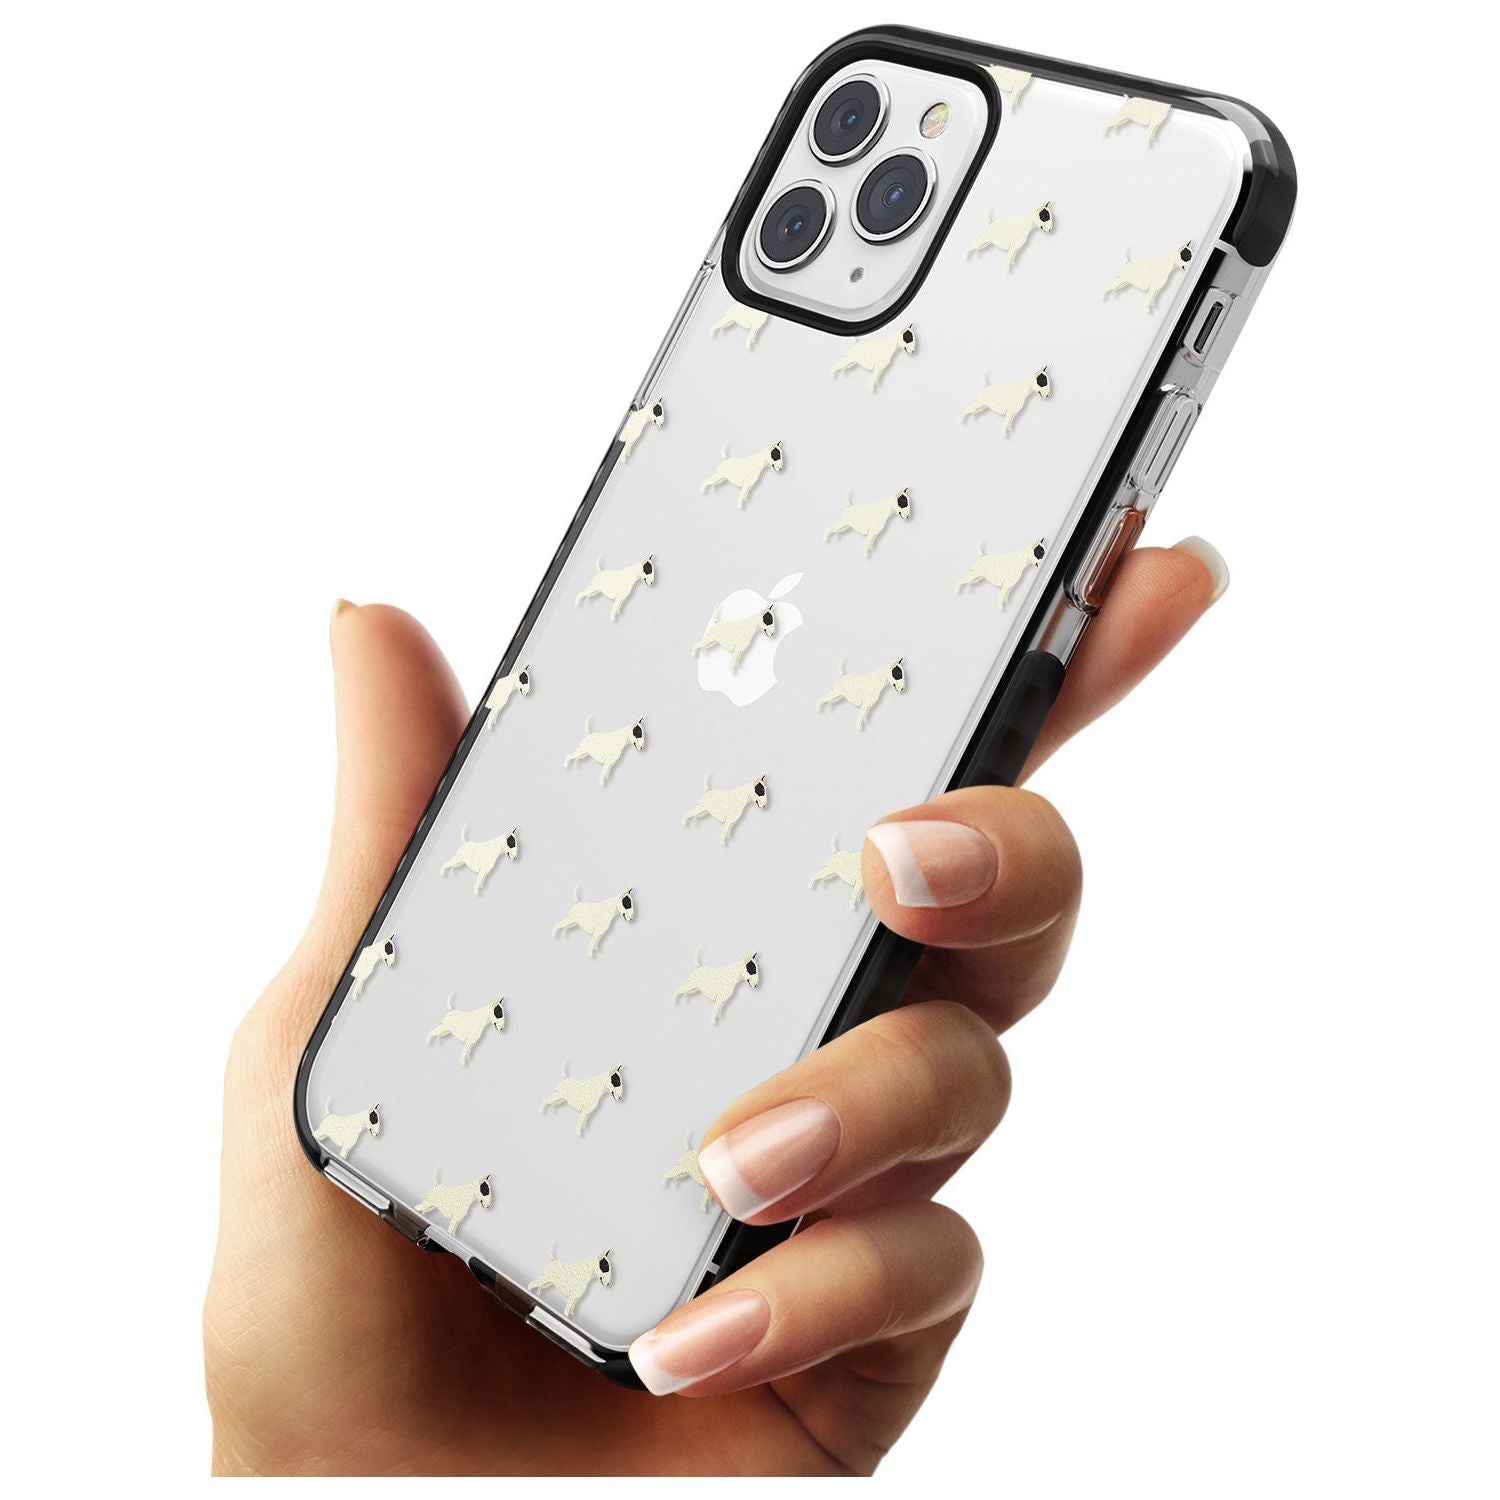 Bull Terrier Dog Pattern Clear Black Impact Phone Case for iPhone 11 Pro Max